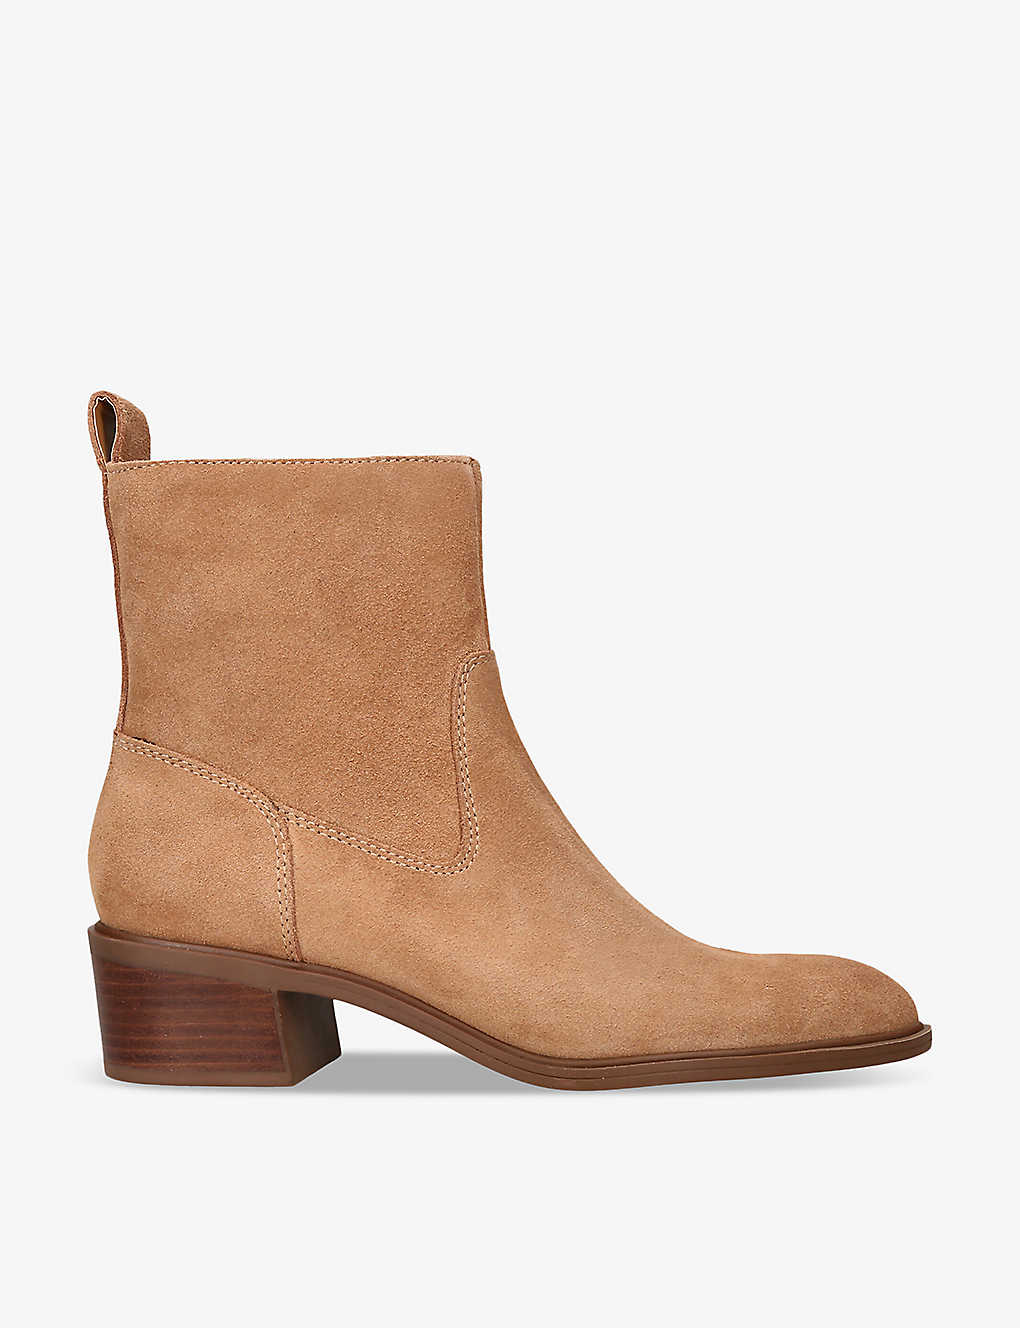 Dolce Vita Womens Tan Bili Panelled Suede Heeled Ankle Boots